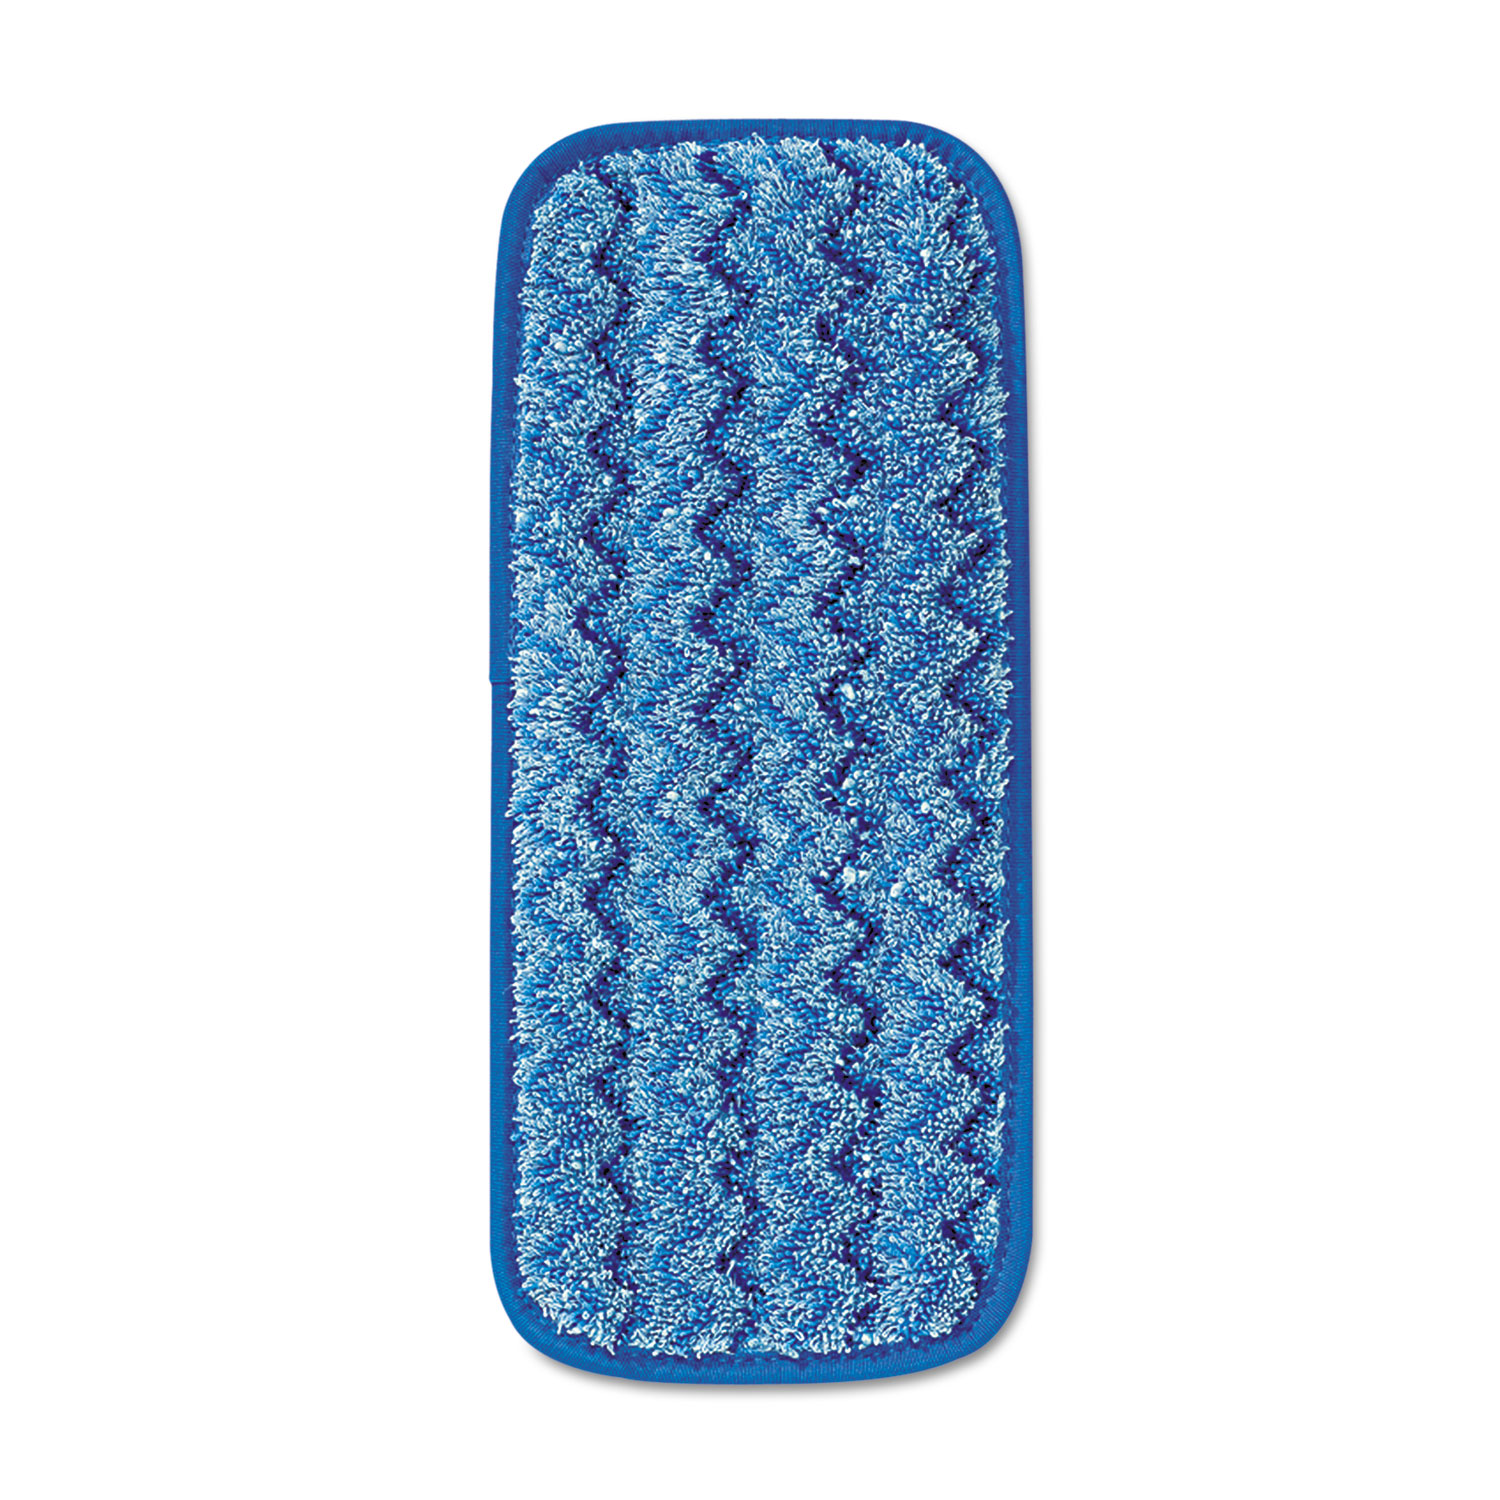 Microfiber Wall/Stair Wet Mopping Pad, Blue, 13 3/4w x 5 1/2d x 1/2h